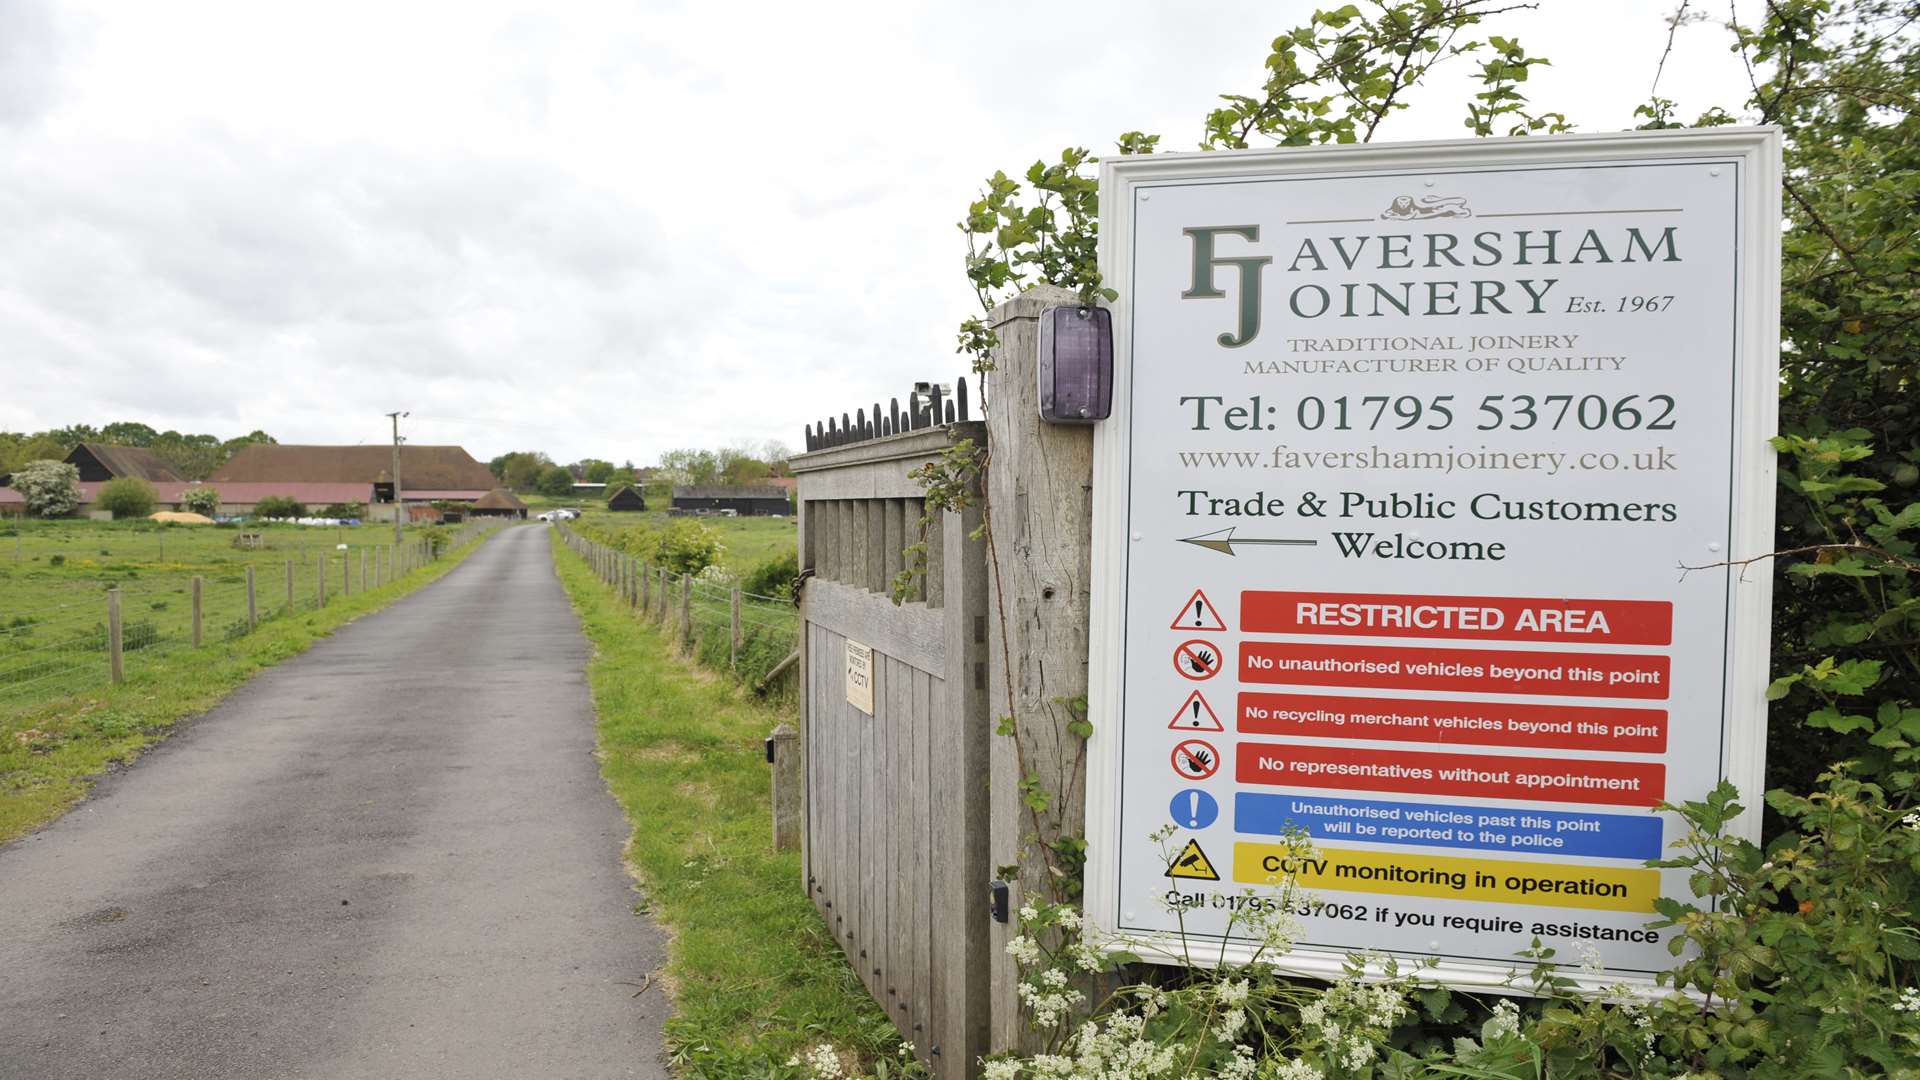 Faversham Joinery where £15,000 of power tools were stolen.